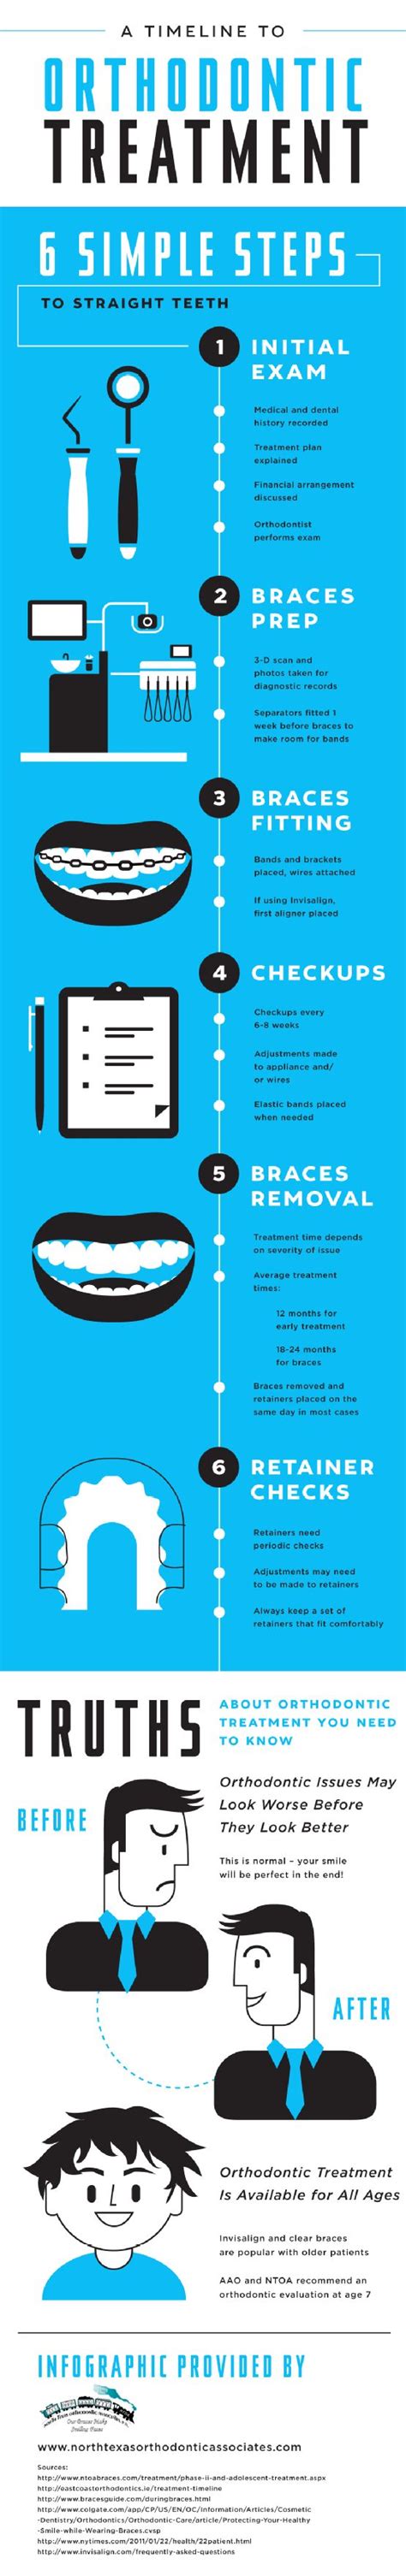 braces timeline and infographic on pinterest